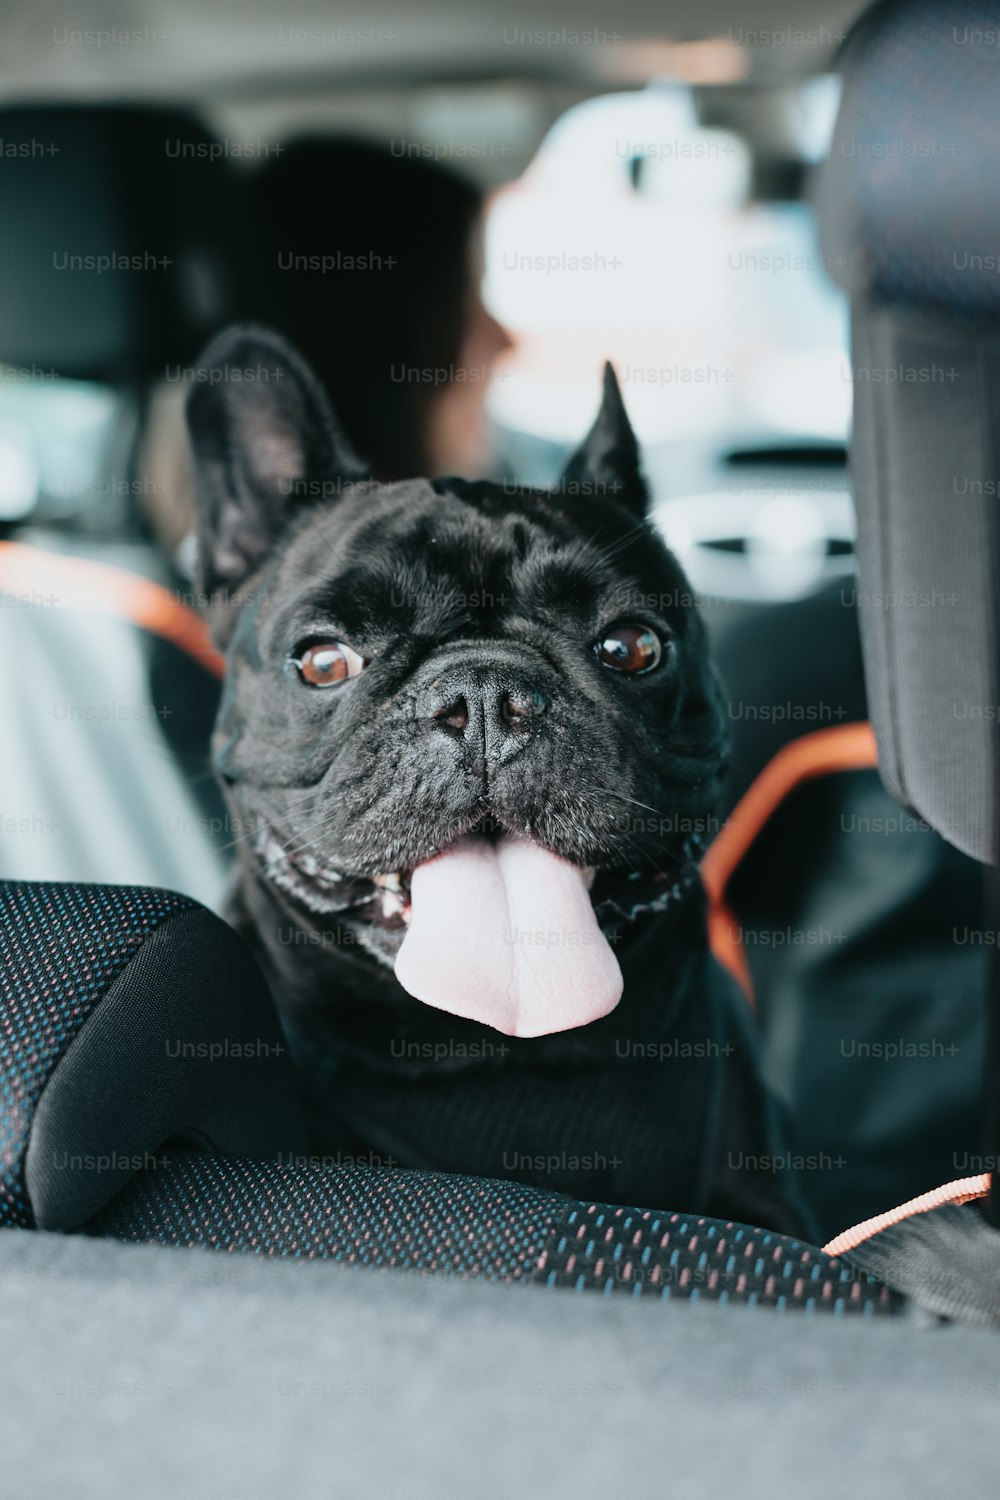 a black dog sitting in the back seat of a car